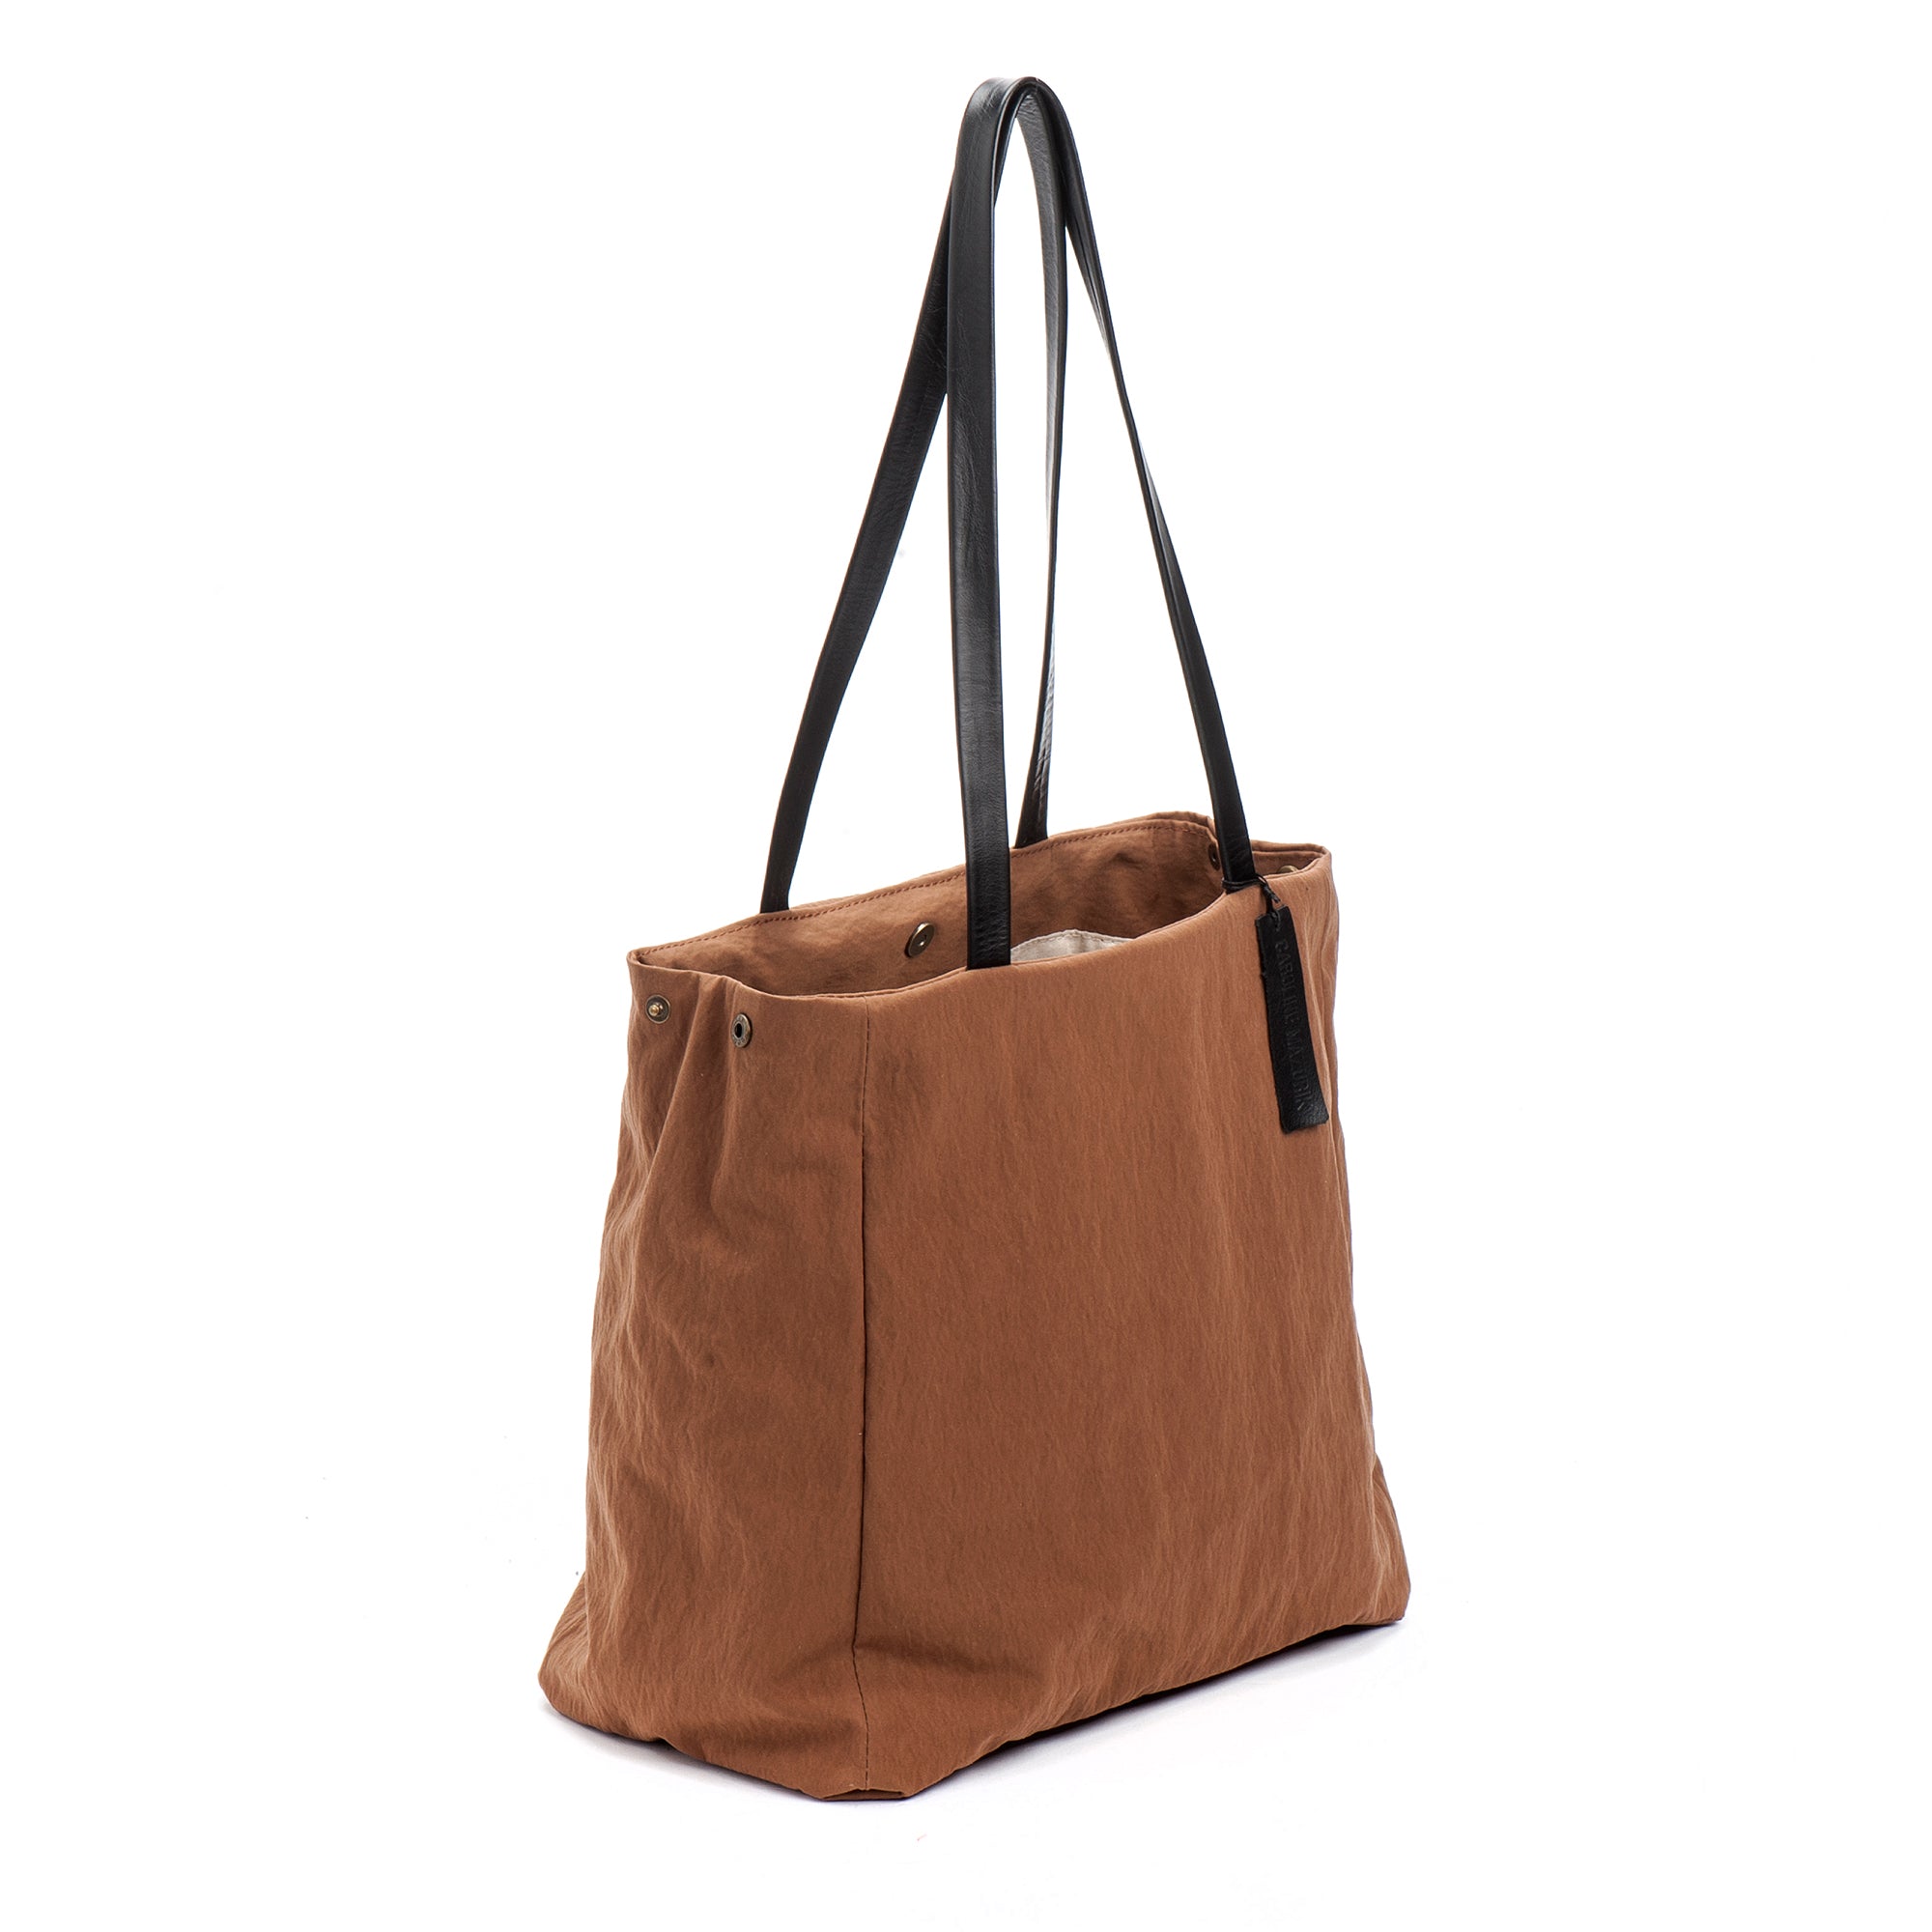 Coffee-Brown Everyday perfect Lightweight Fabric Tote Bag, shoppers Bag